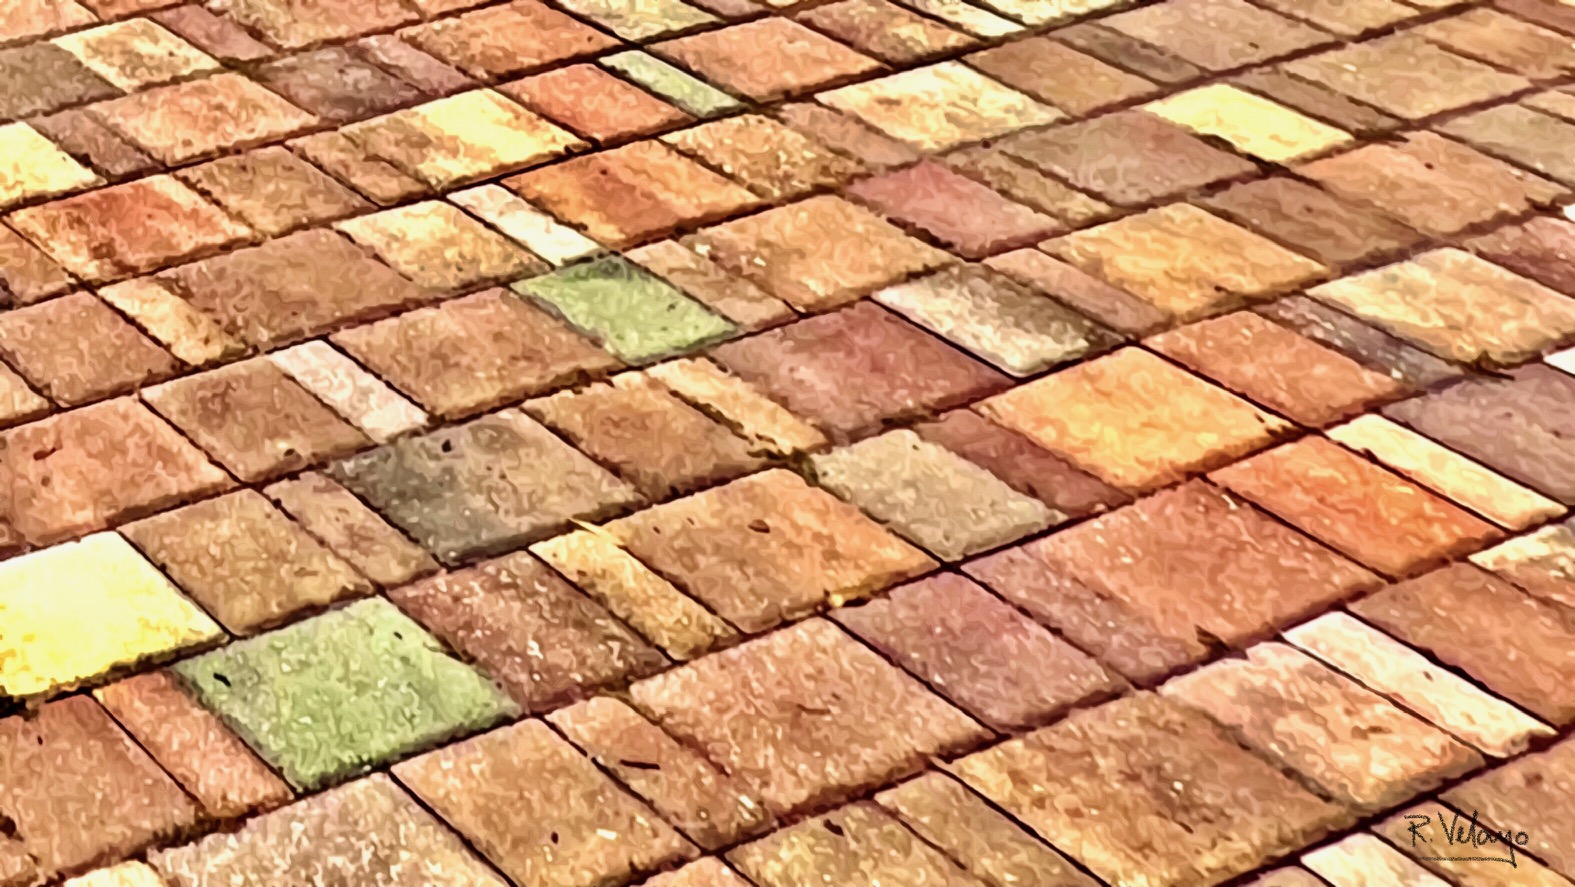 "PAVING SLABS IN EARTH TONES" [Created: 4/19/2022]